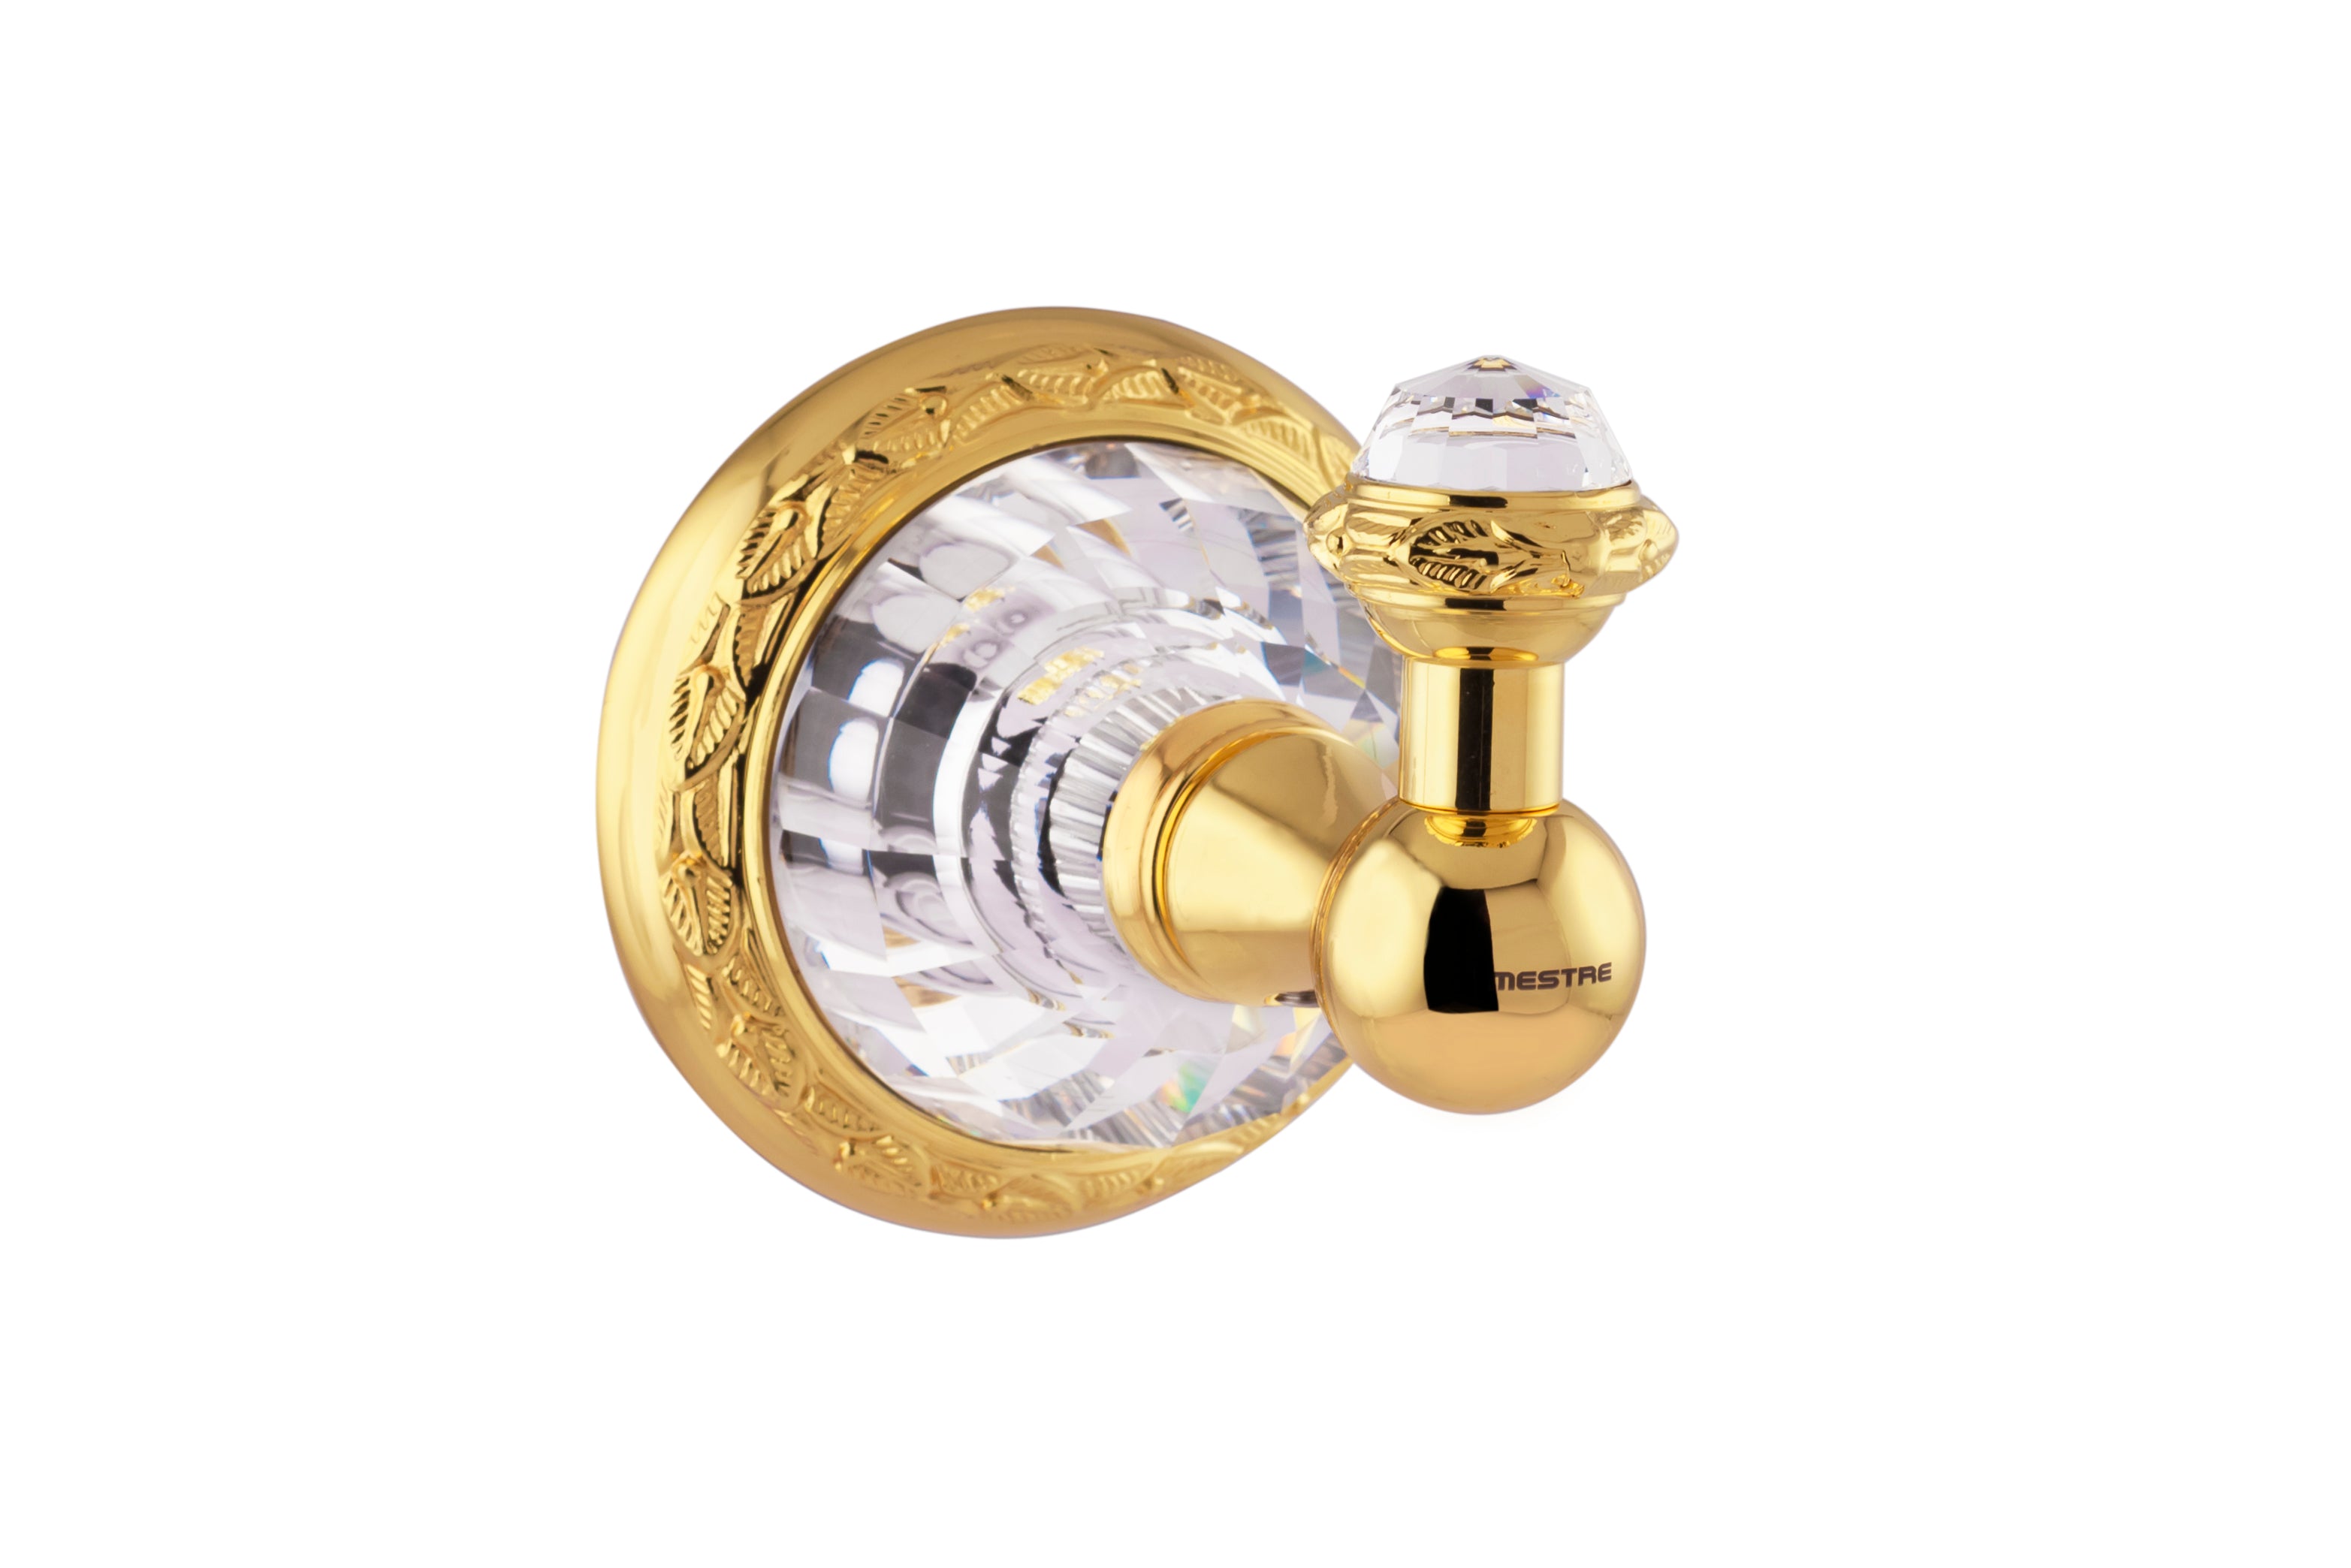 Artica Soap Dish Holder, Luxury Bathroom Accessory. Wall-Mounted Soap Dish Polished 24K Gold Plated